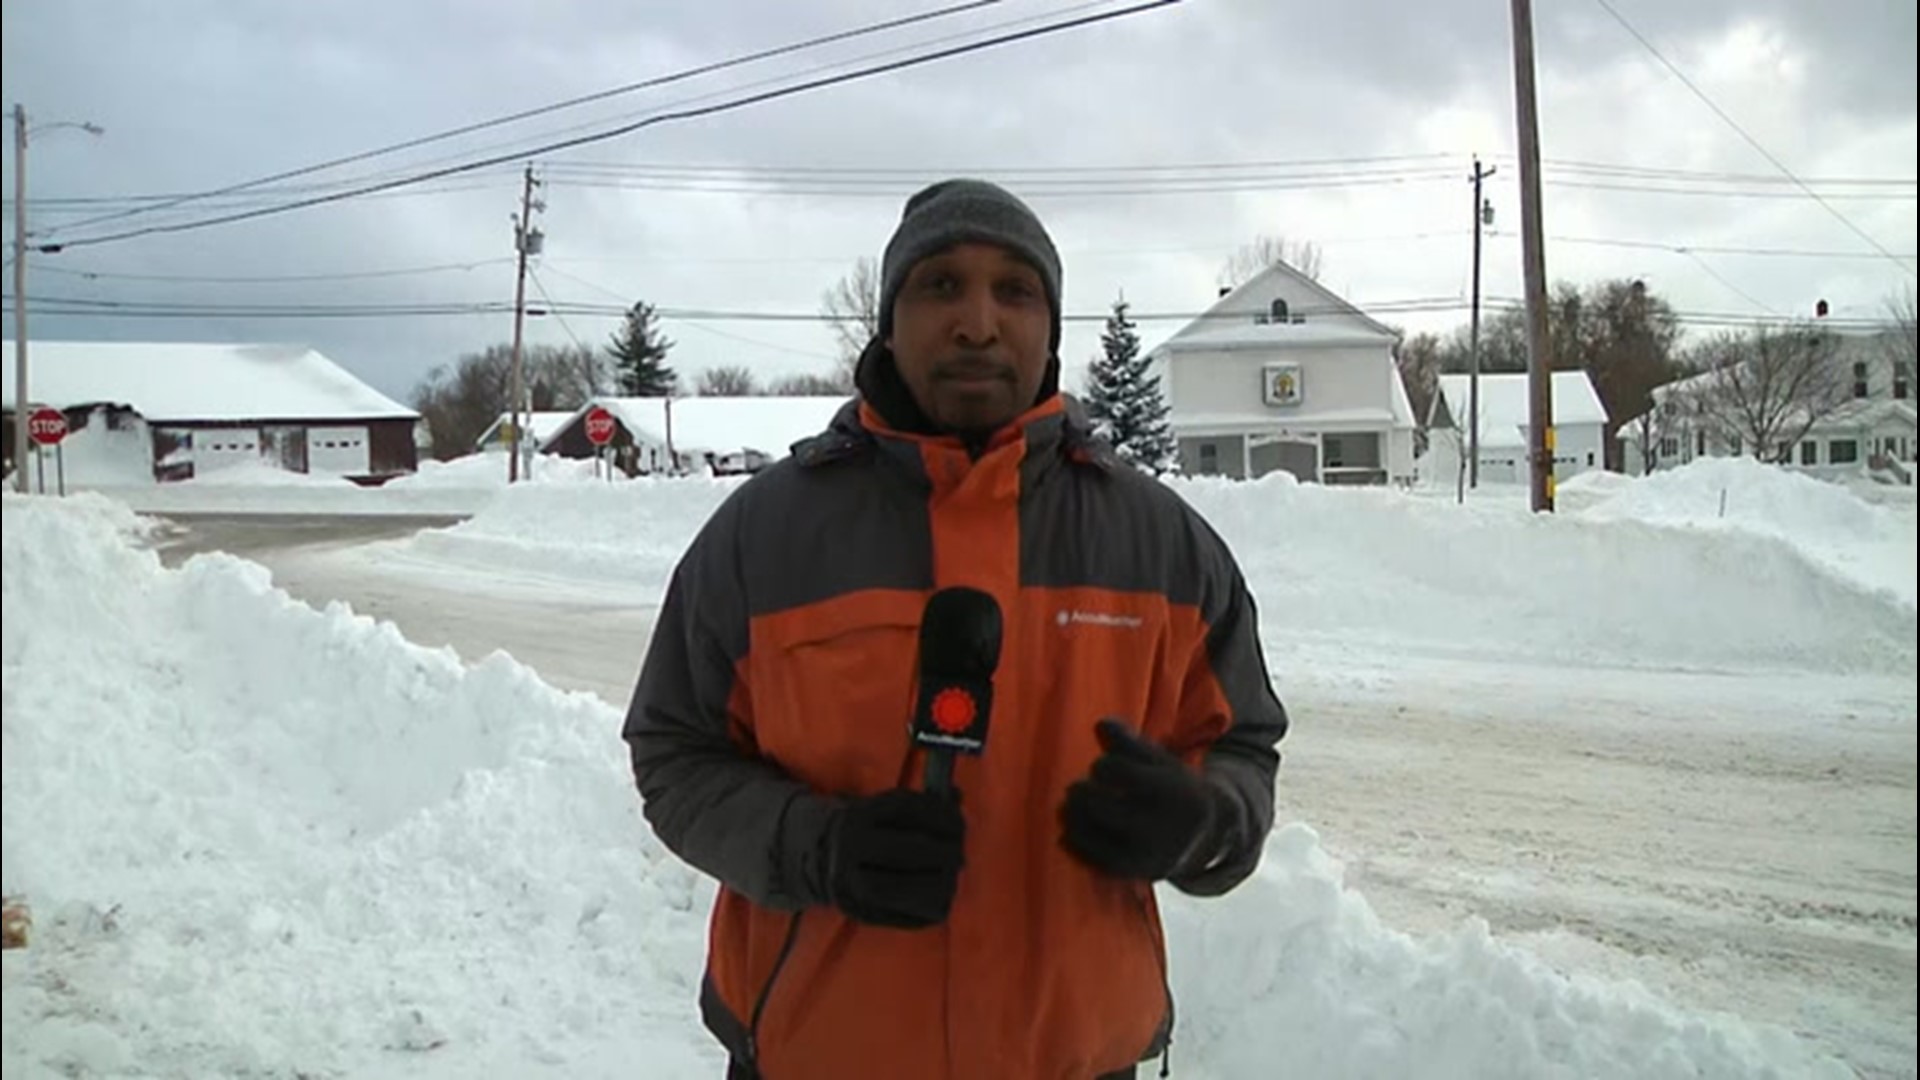 Our Dexter Henry was in Adams Center, New York covering his first lake-effect event dealing blizzard and whiteout conditions He joined us on the AccuWeather Network to share his experience.